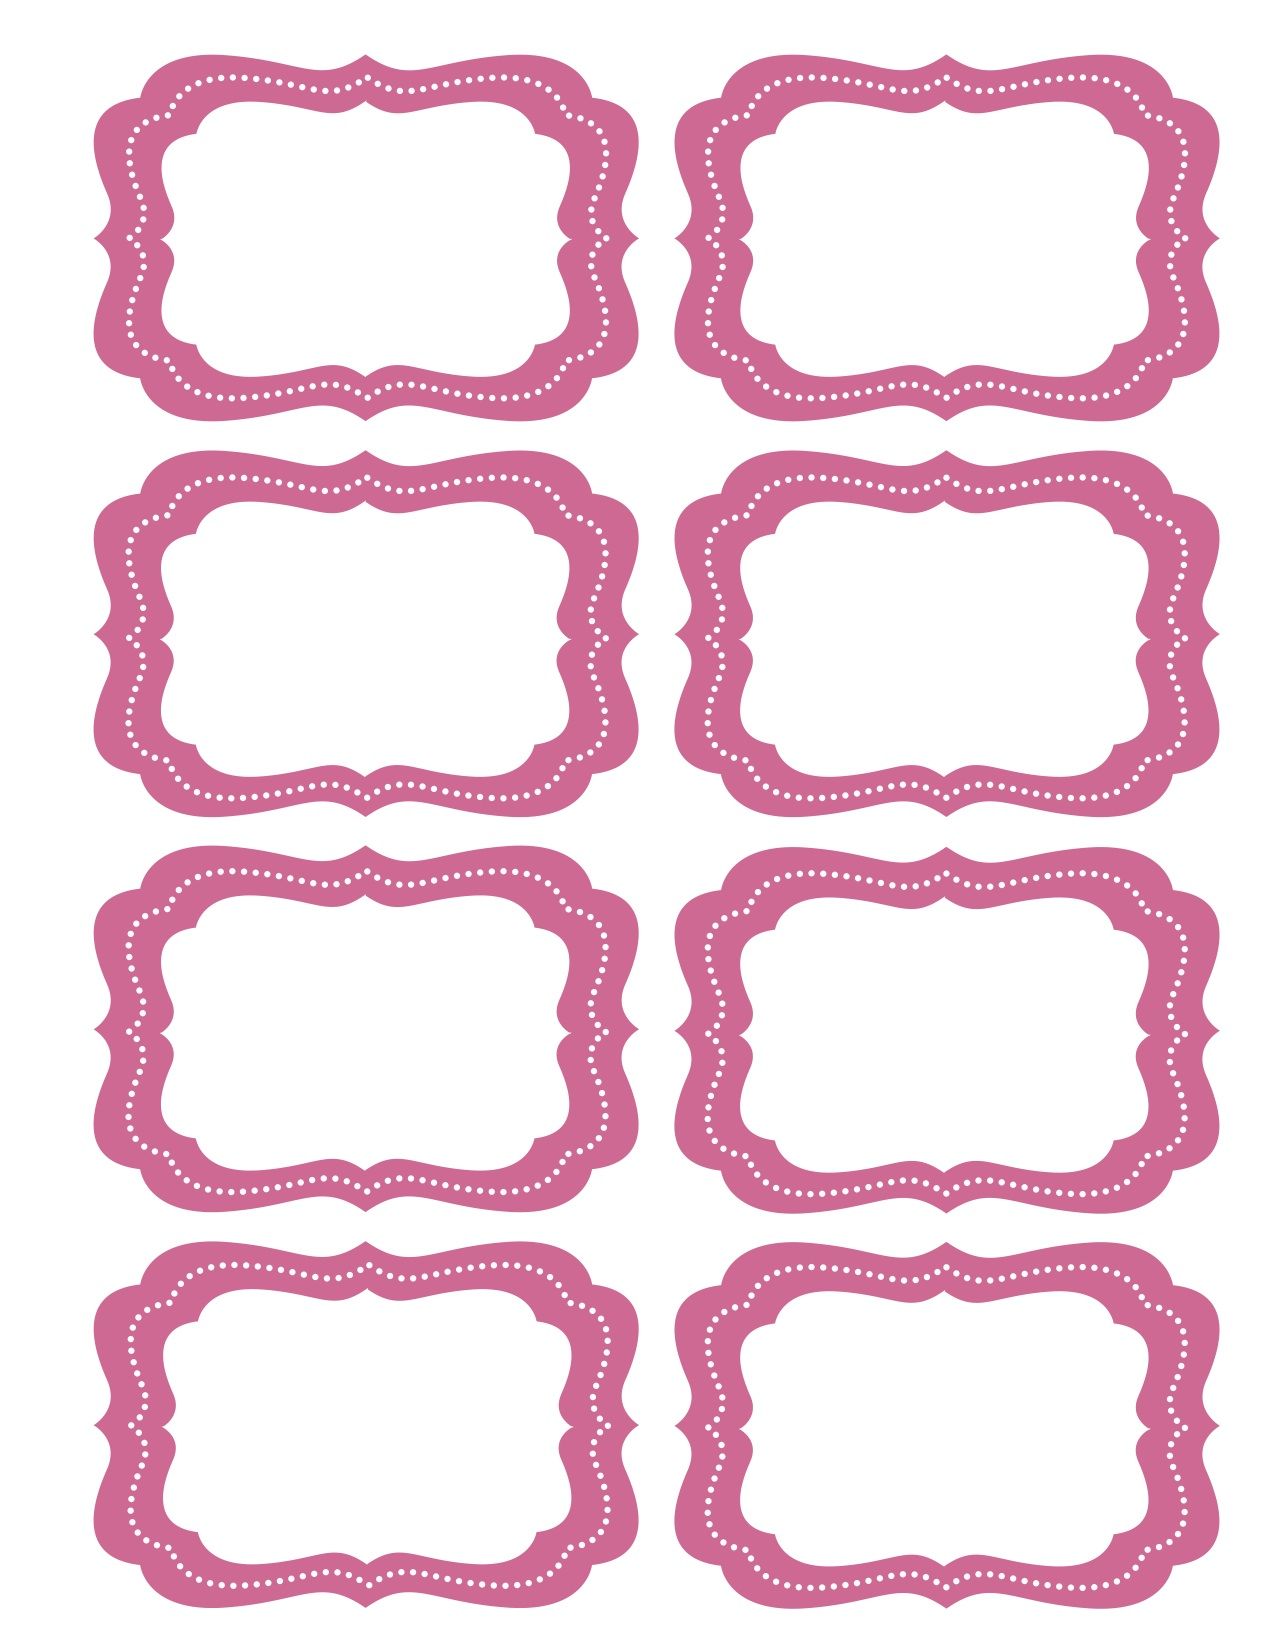 Label clipart candy. Free printable bag templates